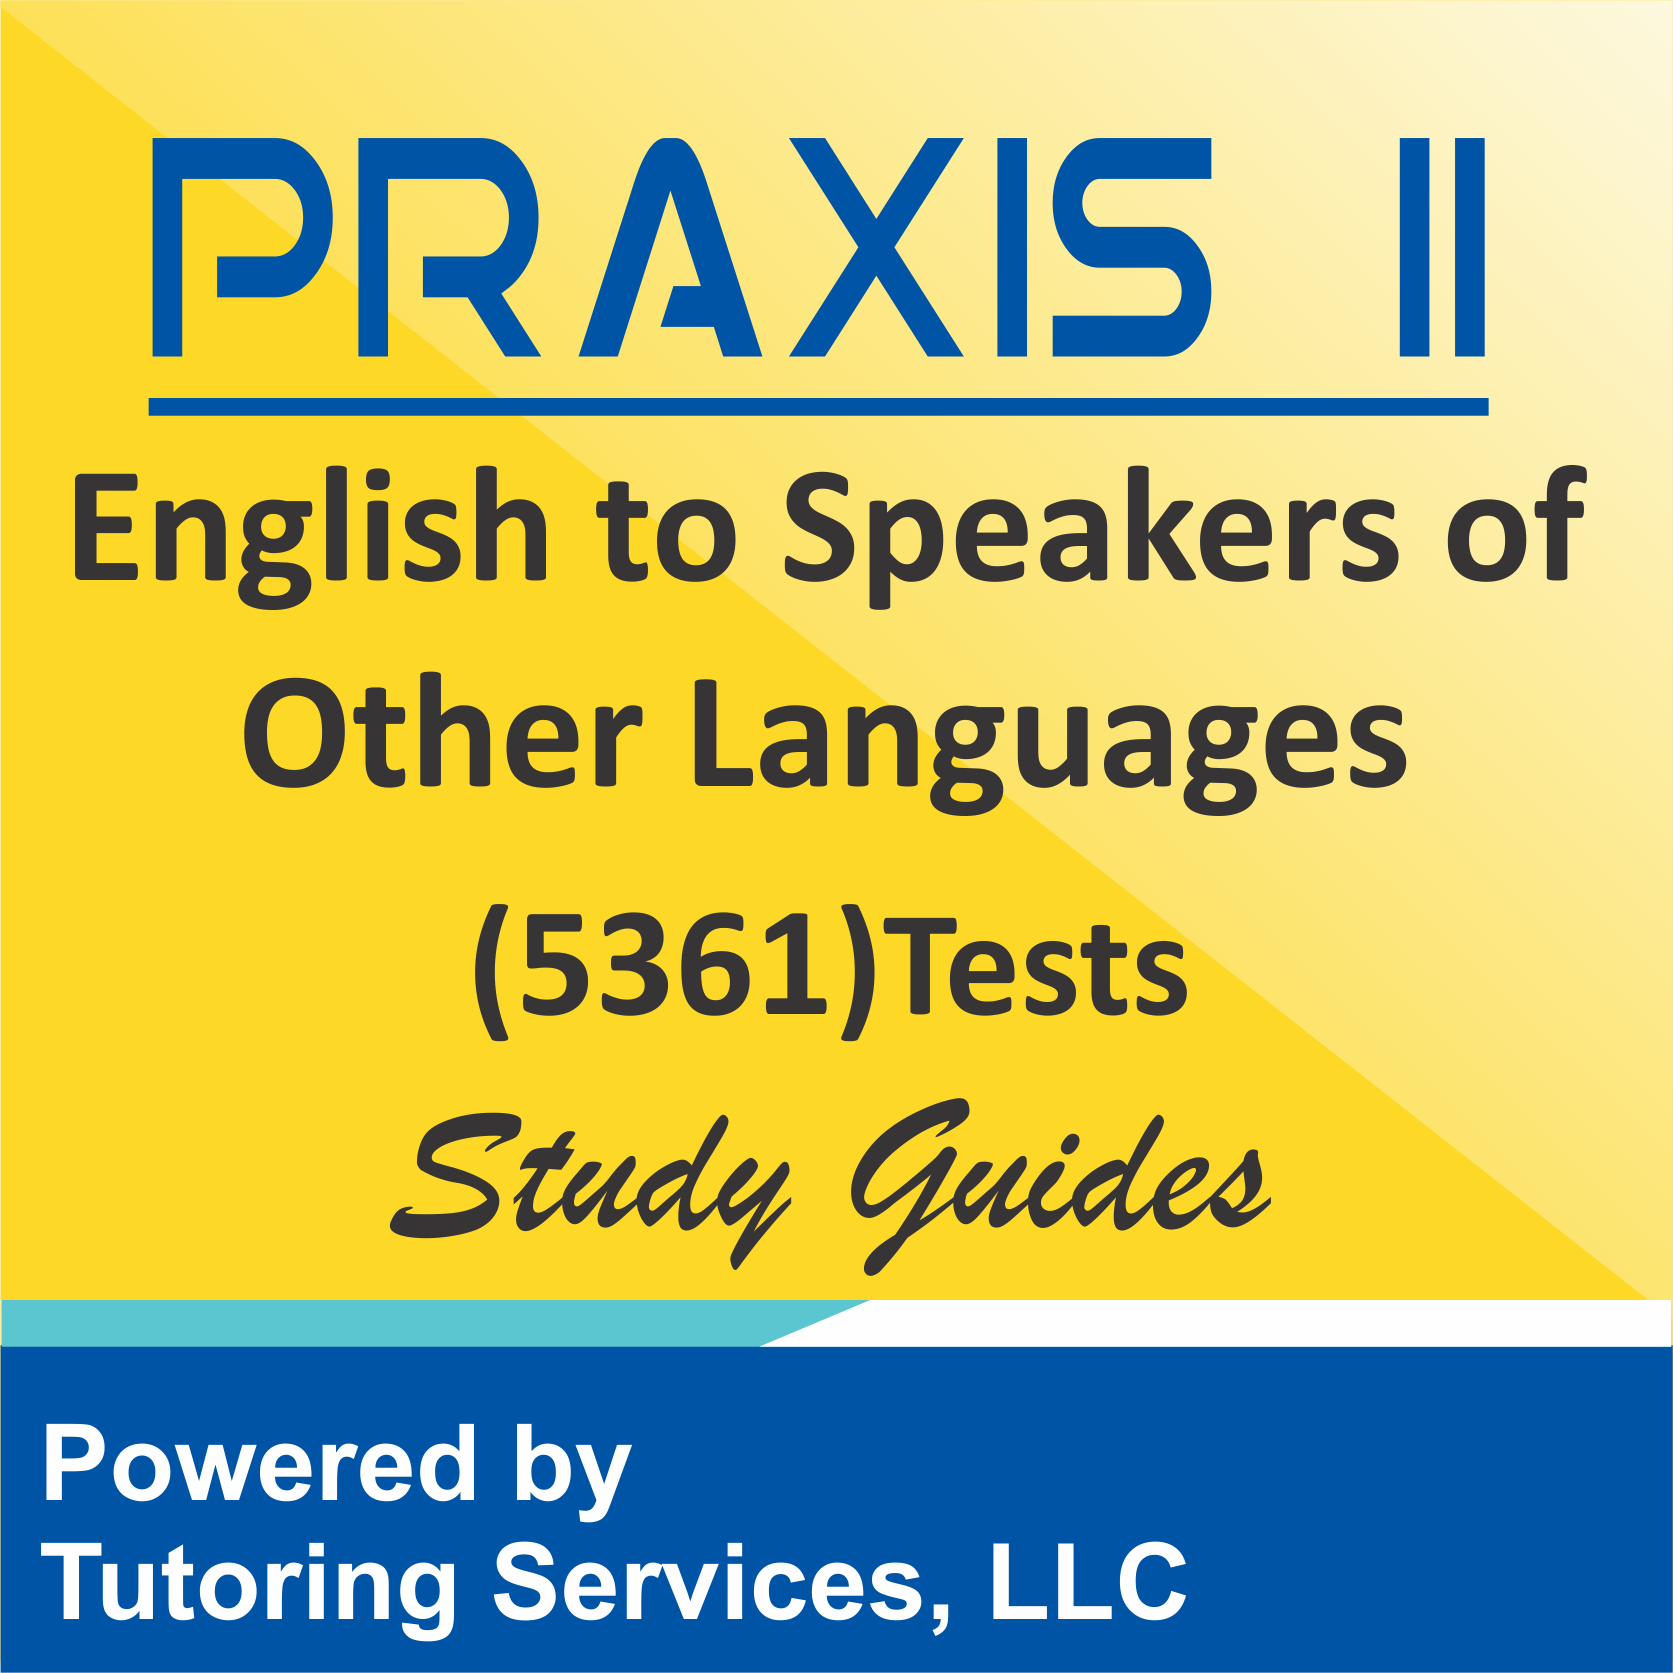 Praxis II English to Speakers of Other Languages (5361) Examination Information